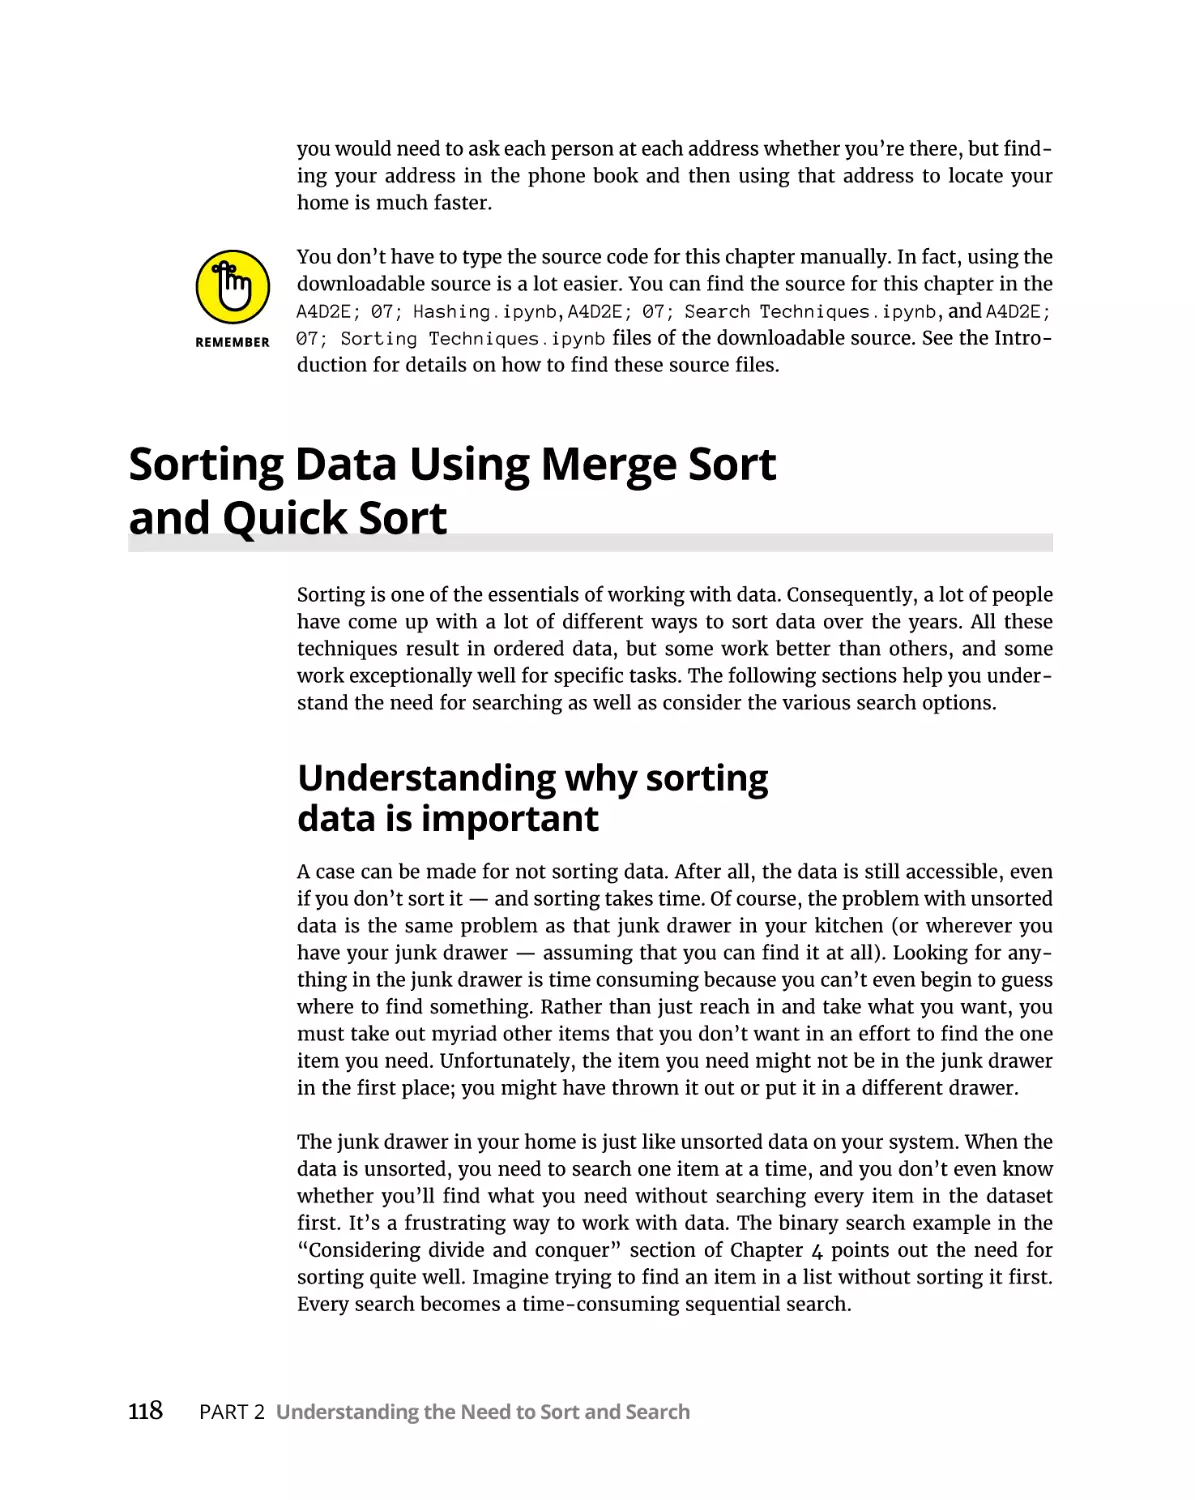 Sorting Data Using Merge Sort and Quick Sort
Understanding why sorting data is important